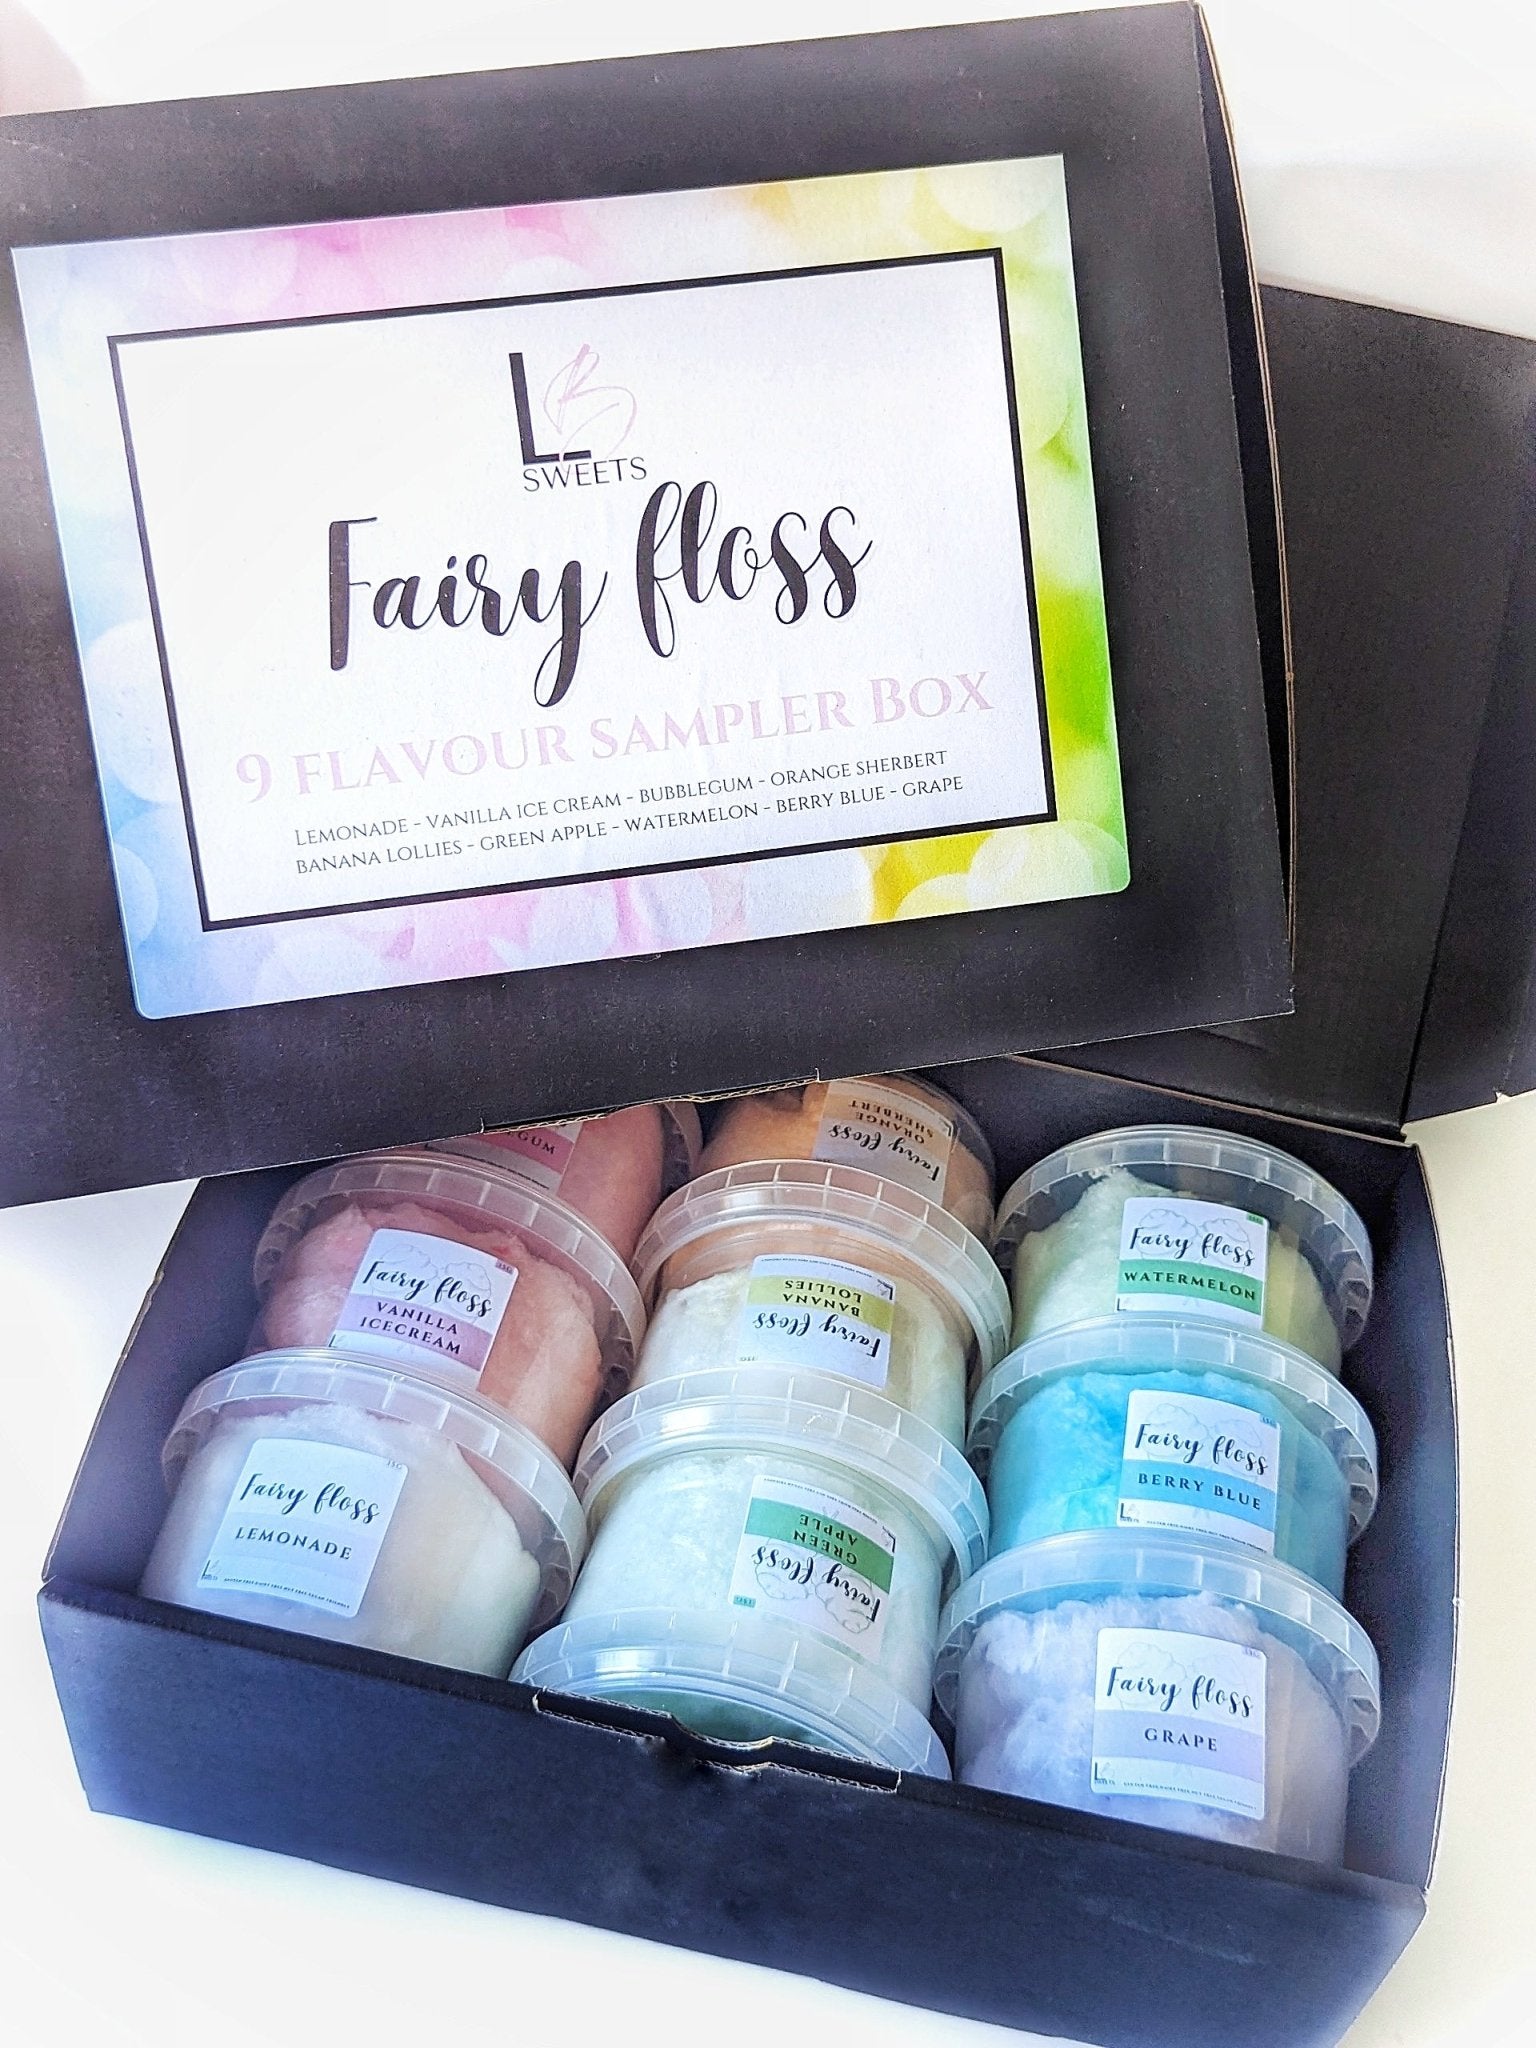 Flossy Sampler Box - LB Sweets | Fairy floss & Favours